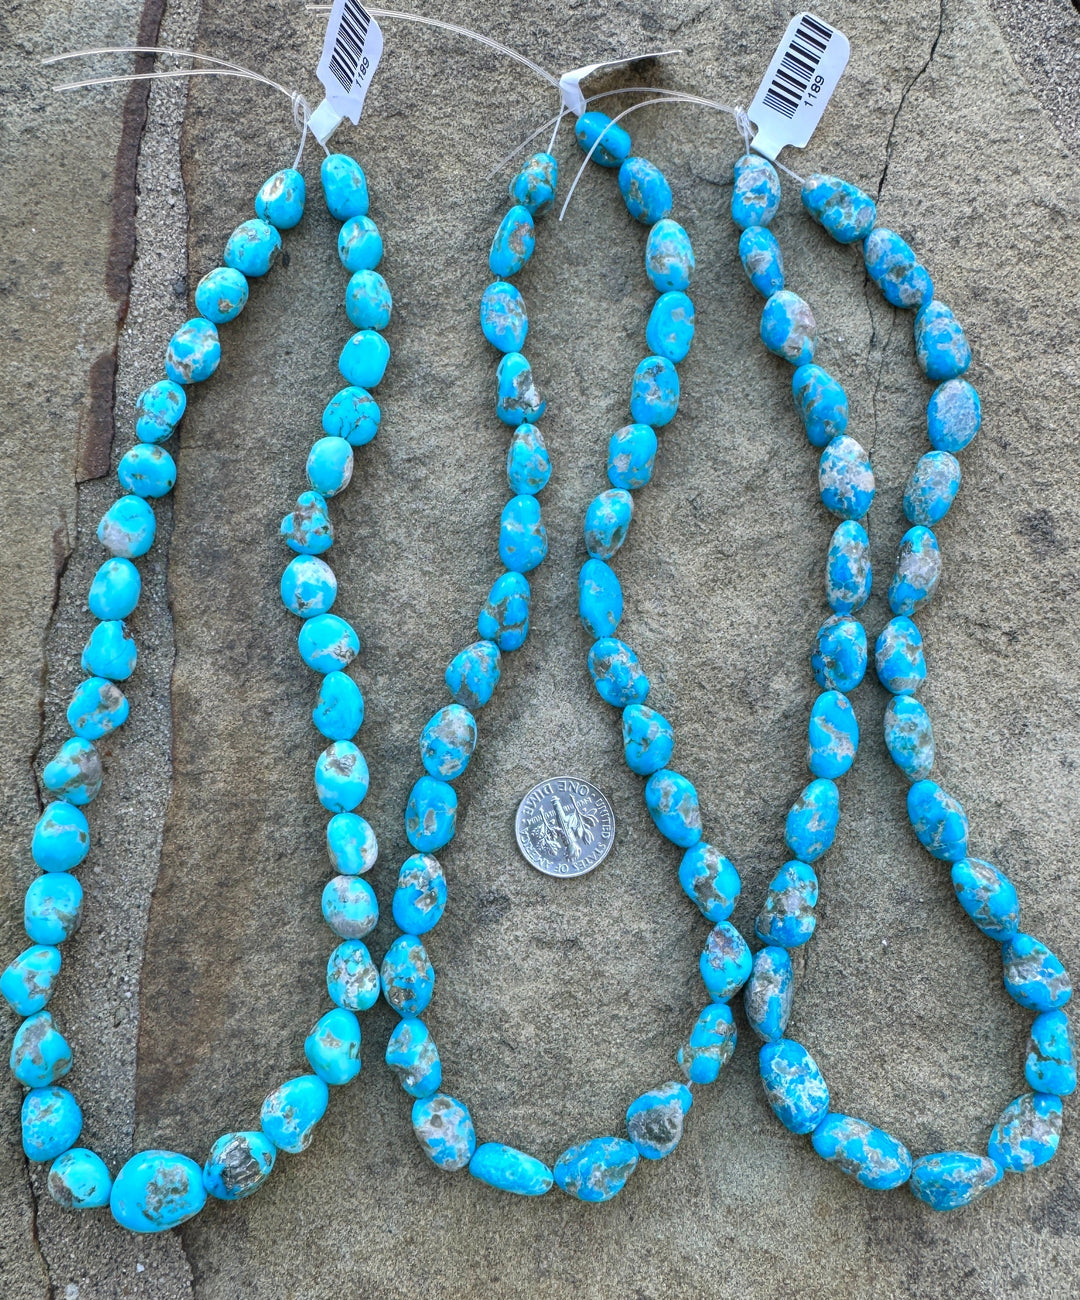 Castle Dome Turquoise (AZ) 13-18mm Nuggets Strands 16 Inch